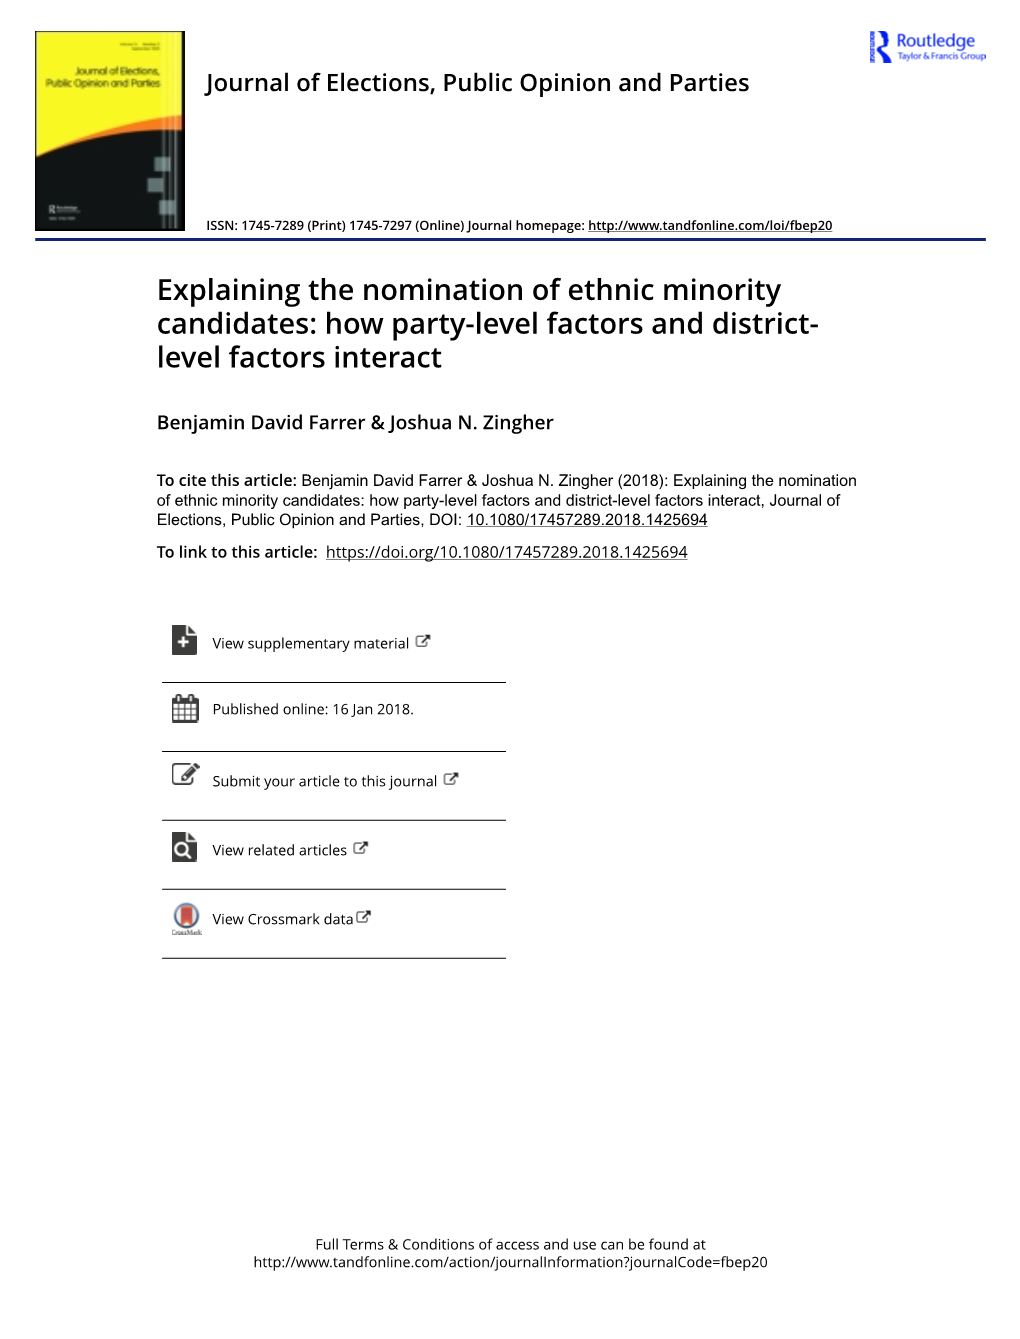 Explaining the Nomination of Ethnic Minority Candidates: How Party-Level Factors and District- Level Factors Interact